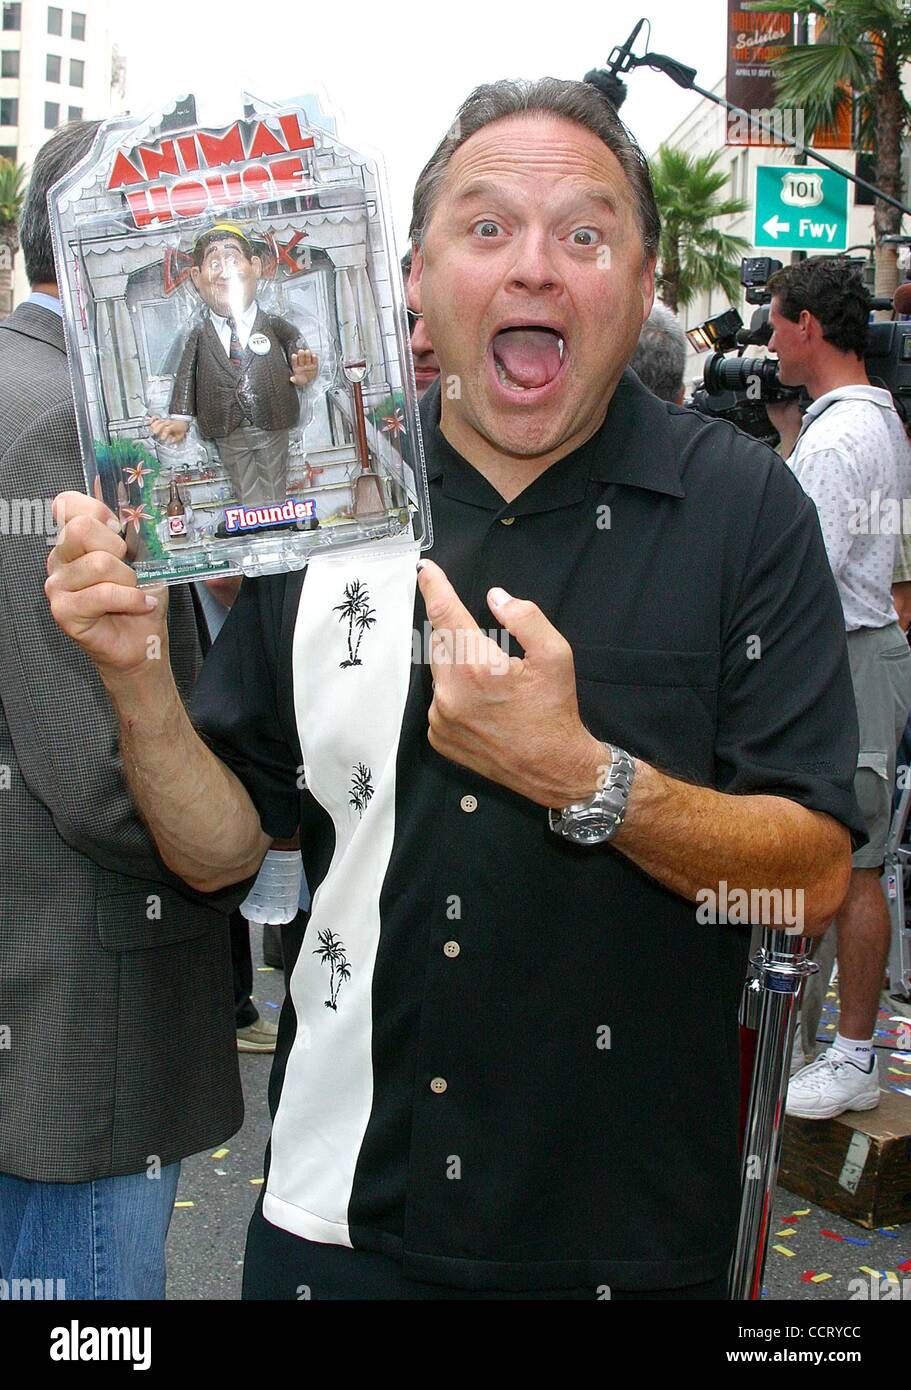 Aug. 21, 2003 - Hollywood, California, U.S. - I7870CHW - .ANIMAL HOUSE - INVADES HOLLYWOOD BOULEVARD WITH ULTIMATE CAST REUNION AND HOMECOMING PARADE - .IN FRONT KODAK THEATER - HOLLYWOOD BLVD., HOLLYWOOD, CA - .08/21/2003 - .   /   /    2003 - .STEPHEN FURST(Credit Image: Â© Clinton Wallace/Globe P Stock Photo